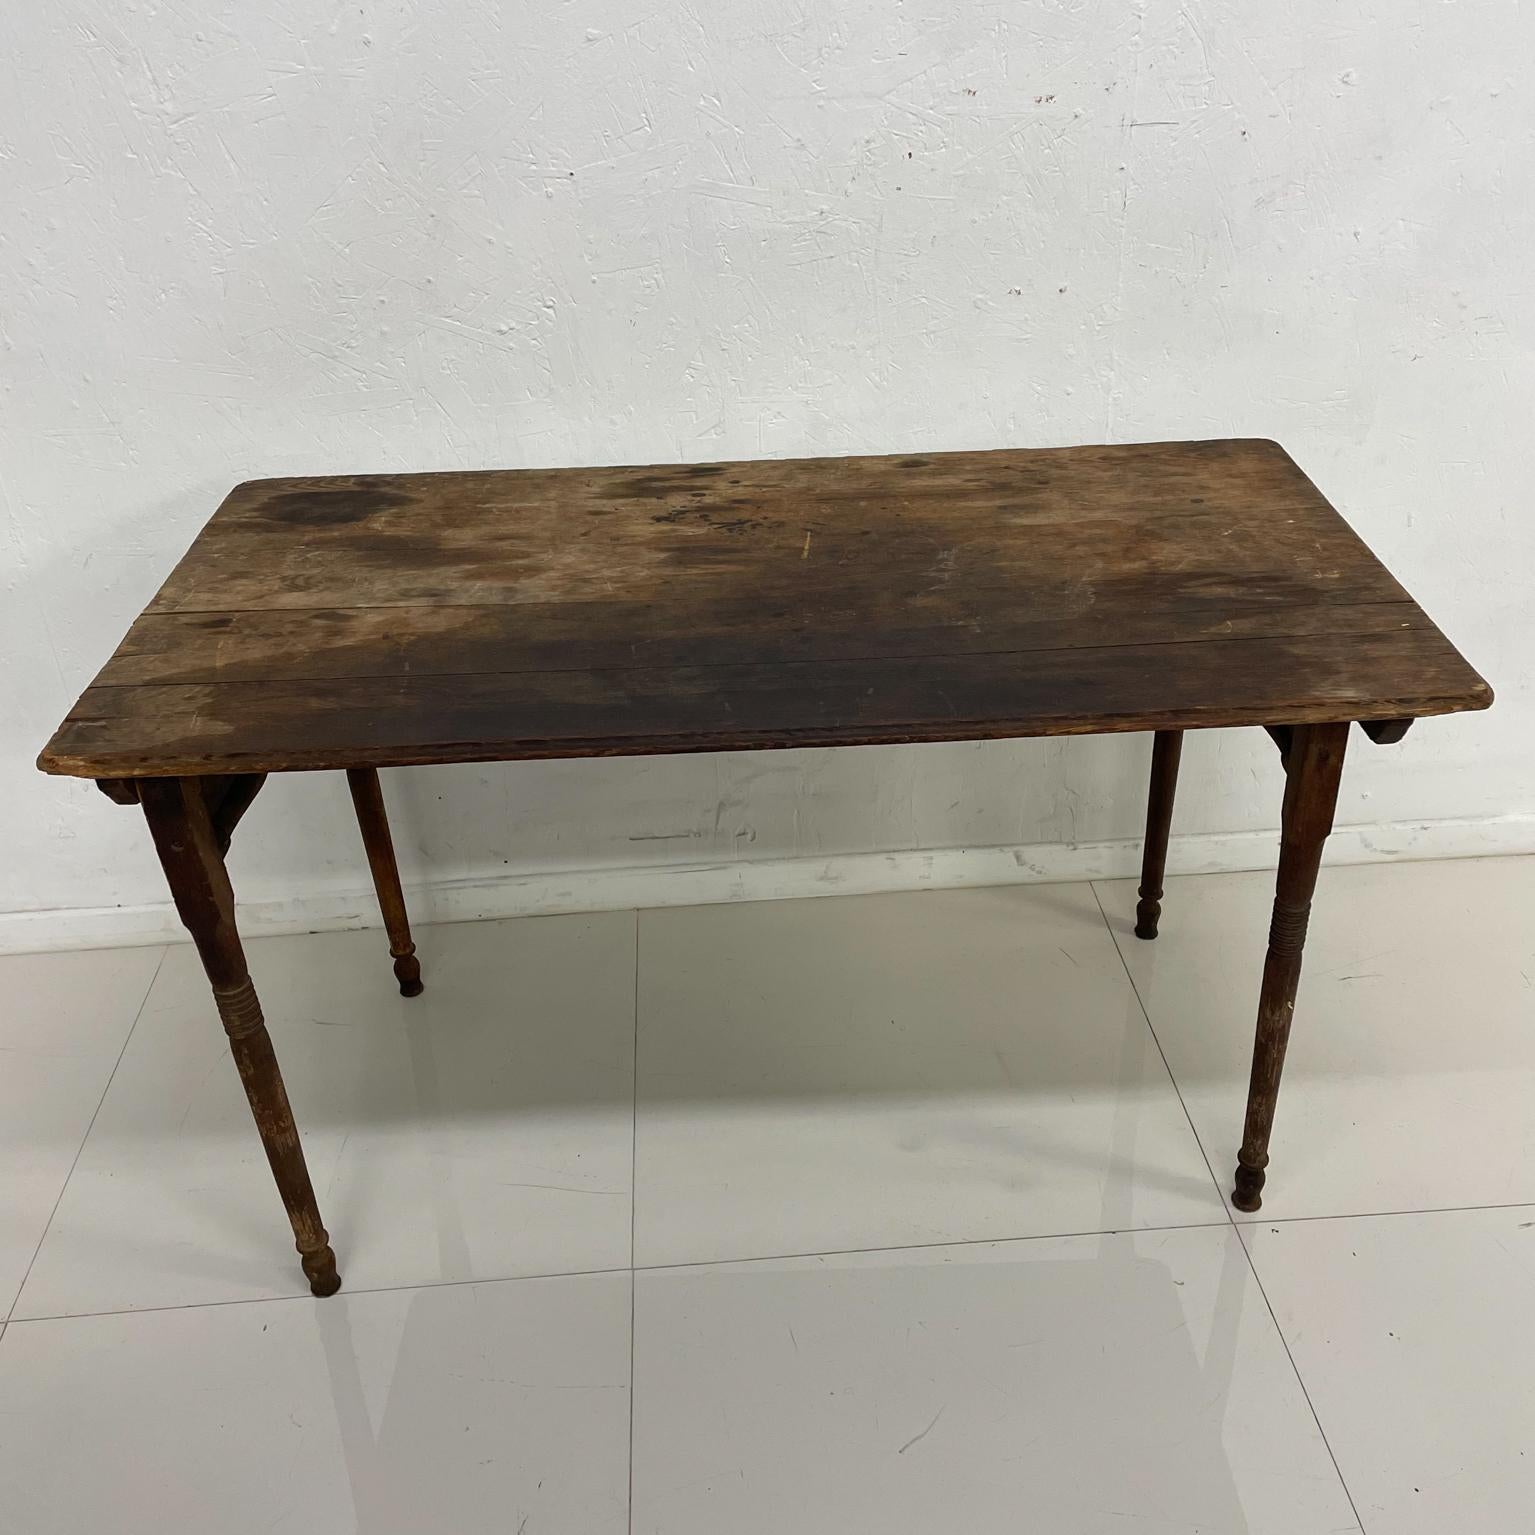 Farmhouse table.
Antique solid wood folding FARM table amazing collapsible system. 
Made in the USA.
Measures: 43.75 W x 23 D 25tall 24.5 knee clearance- folded 43.75 x 23 x 2.38.
Preowned original distressed vintage unrestored condition. Stains